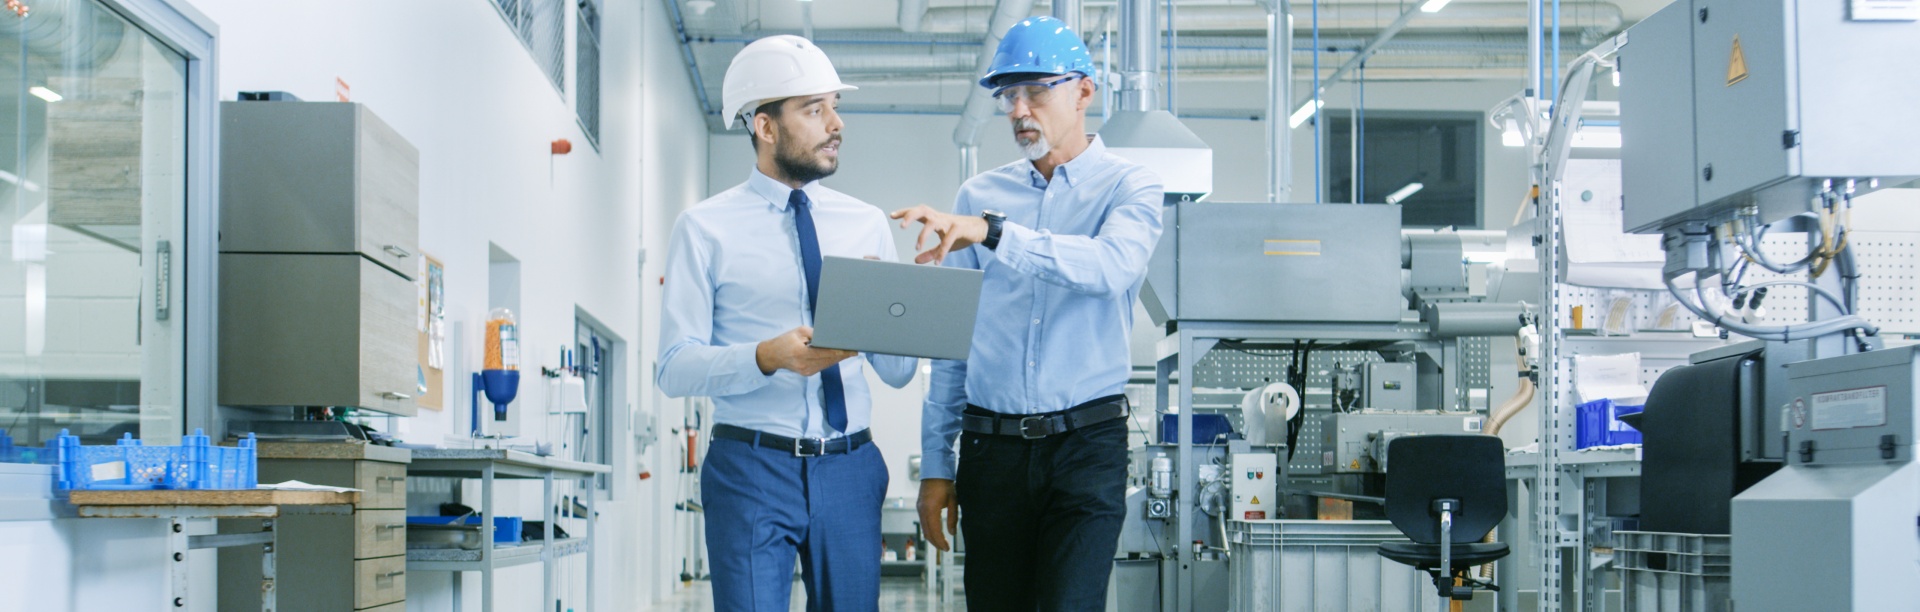 Two men in suits and hard hats holding laptop and having a discussion while walking through an industrial space. 